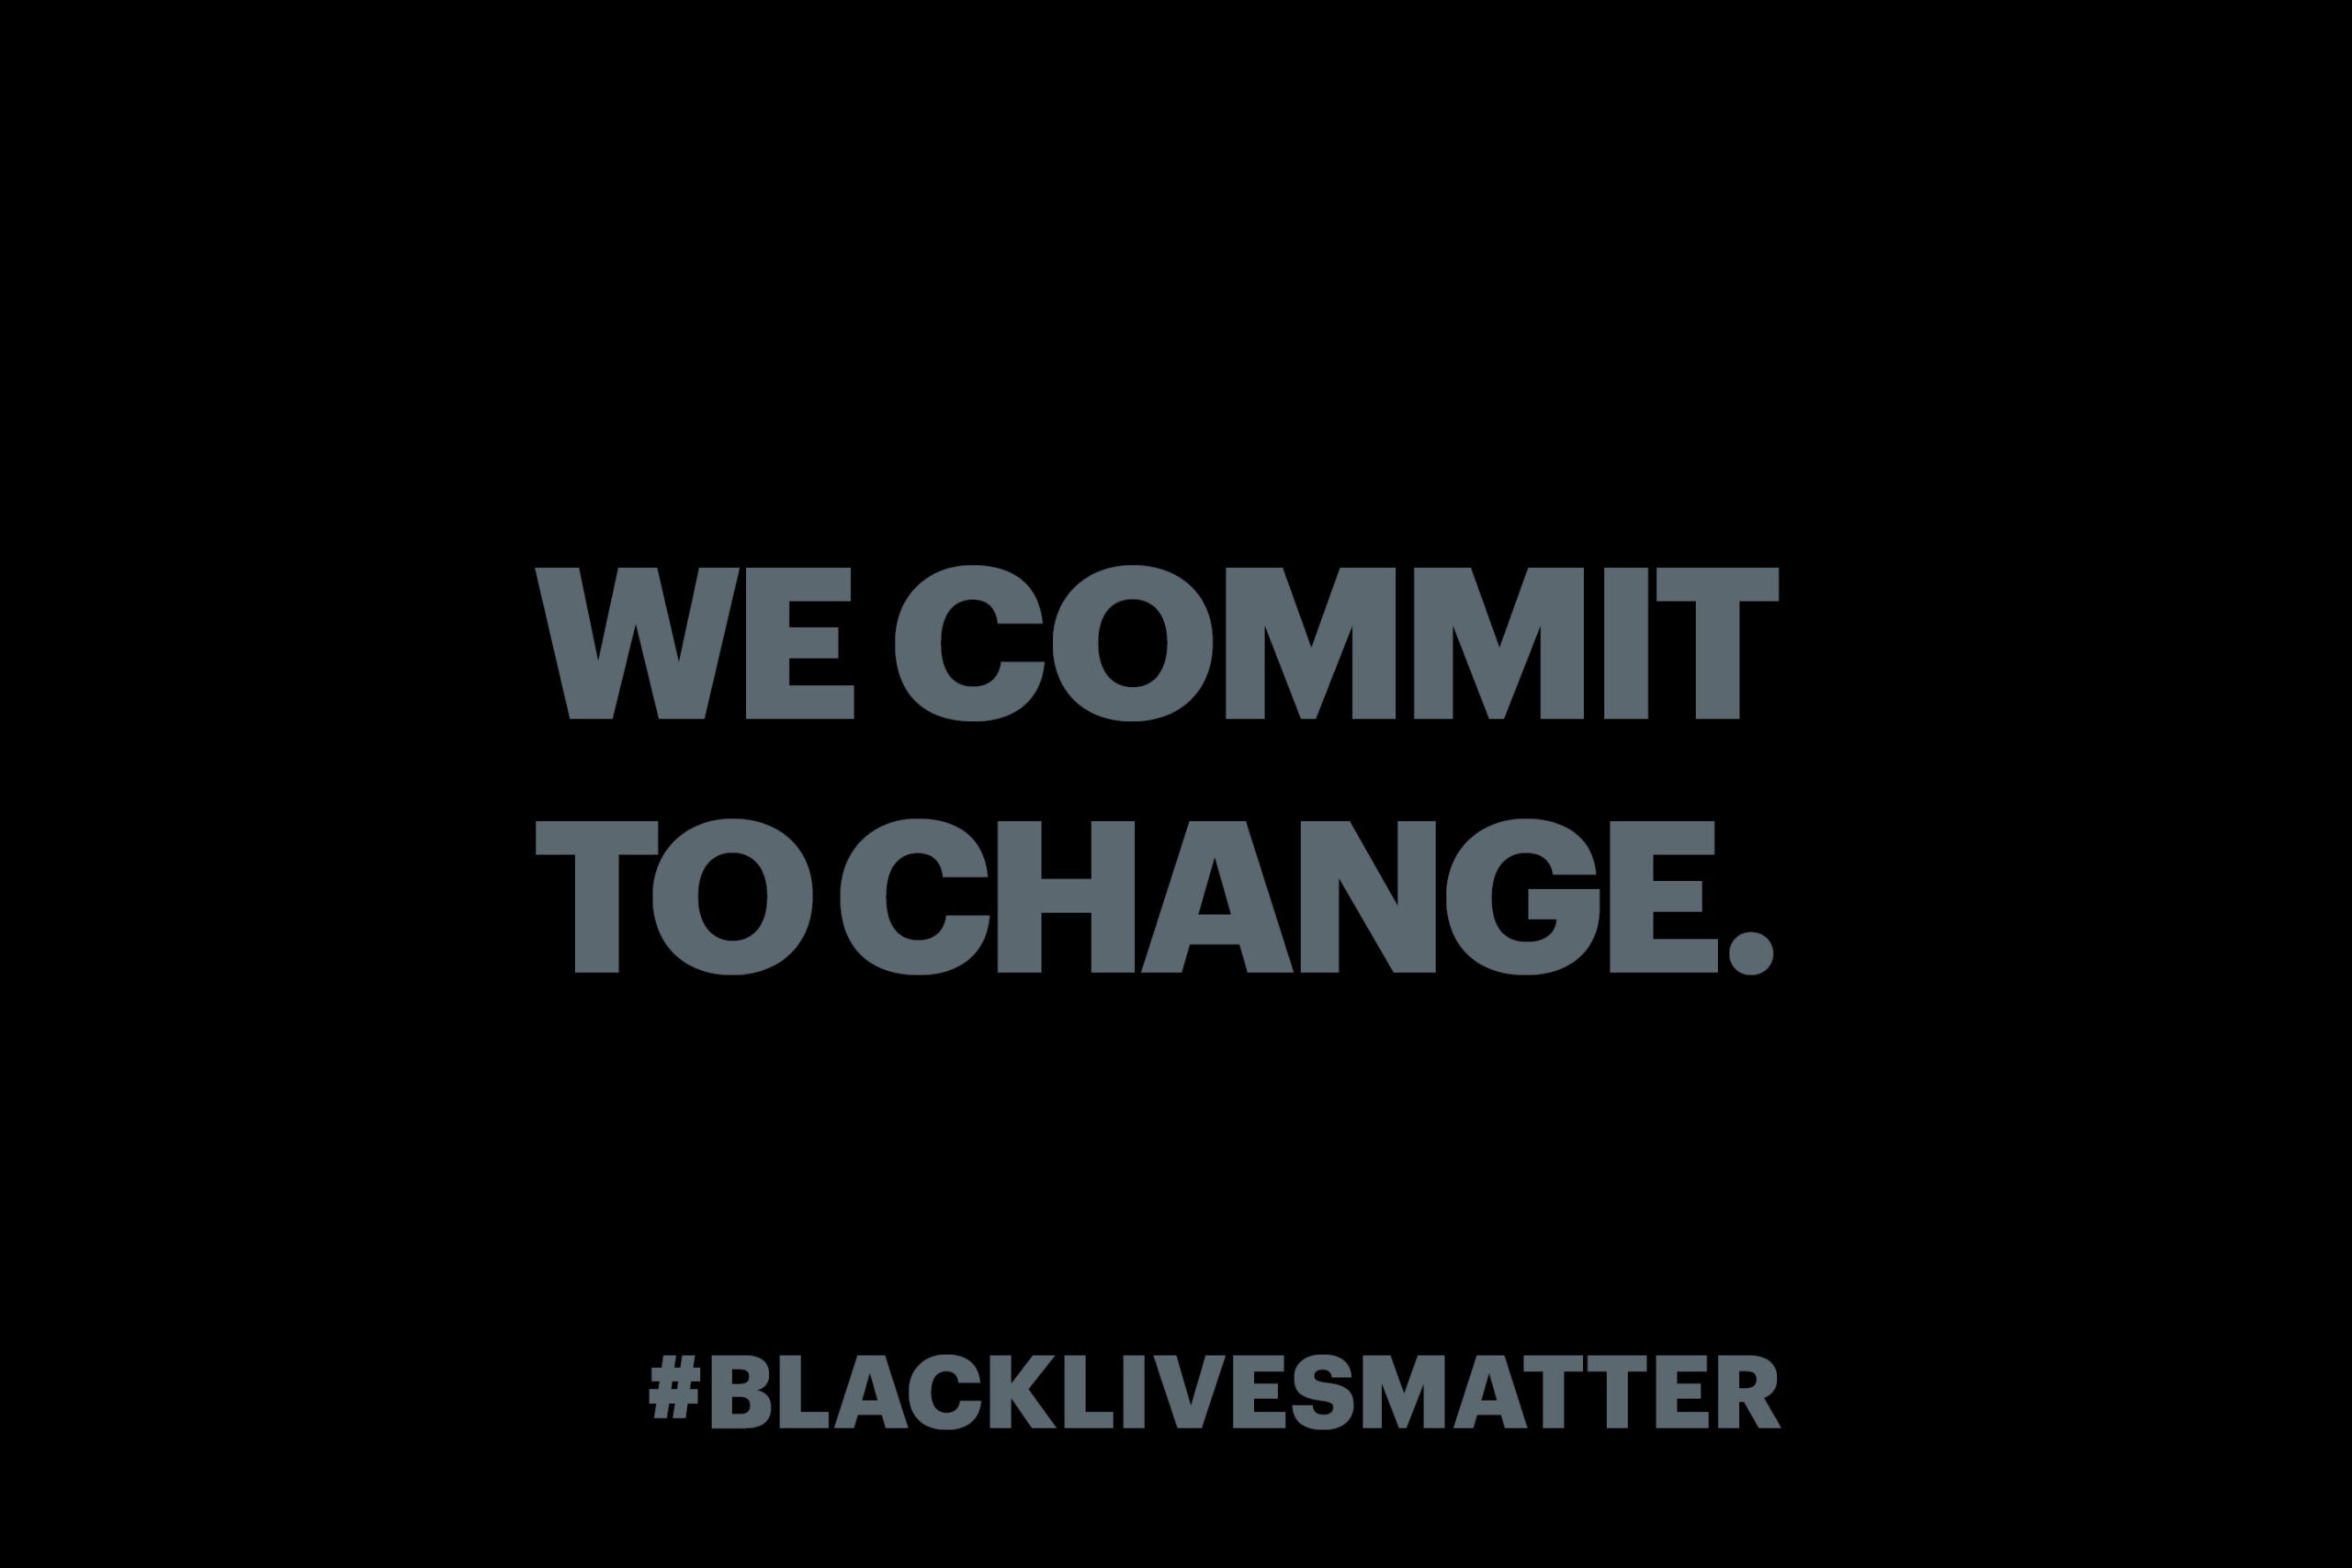 We commit to change